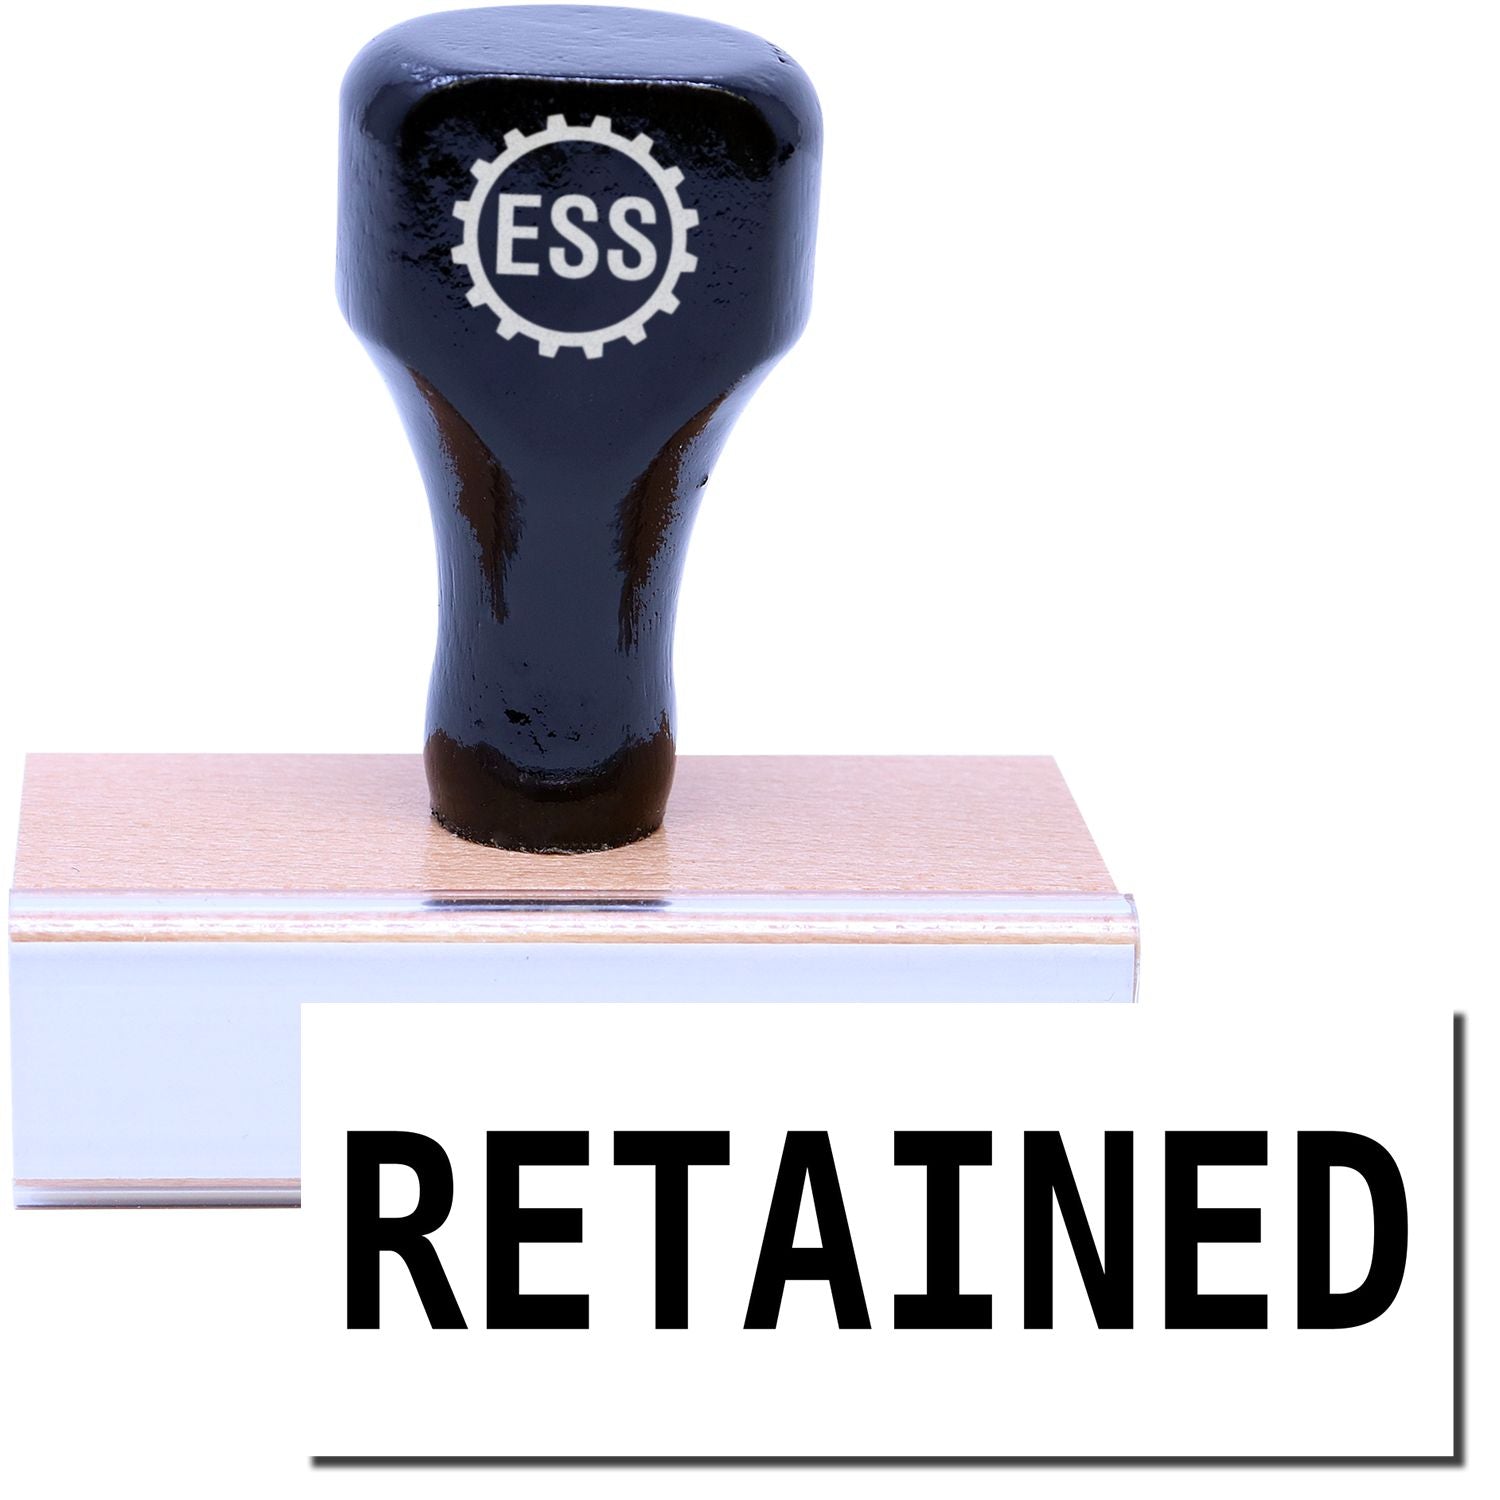 A stock office rubber stamp with a stamped image showing how the text "RETAINED" in a large font is displayed after stamping.